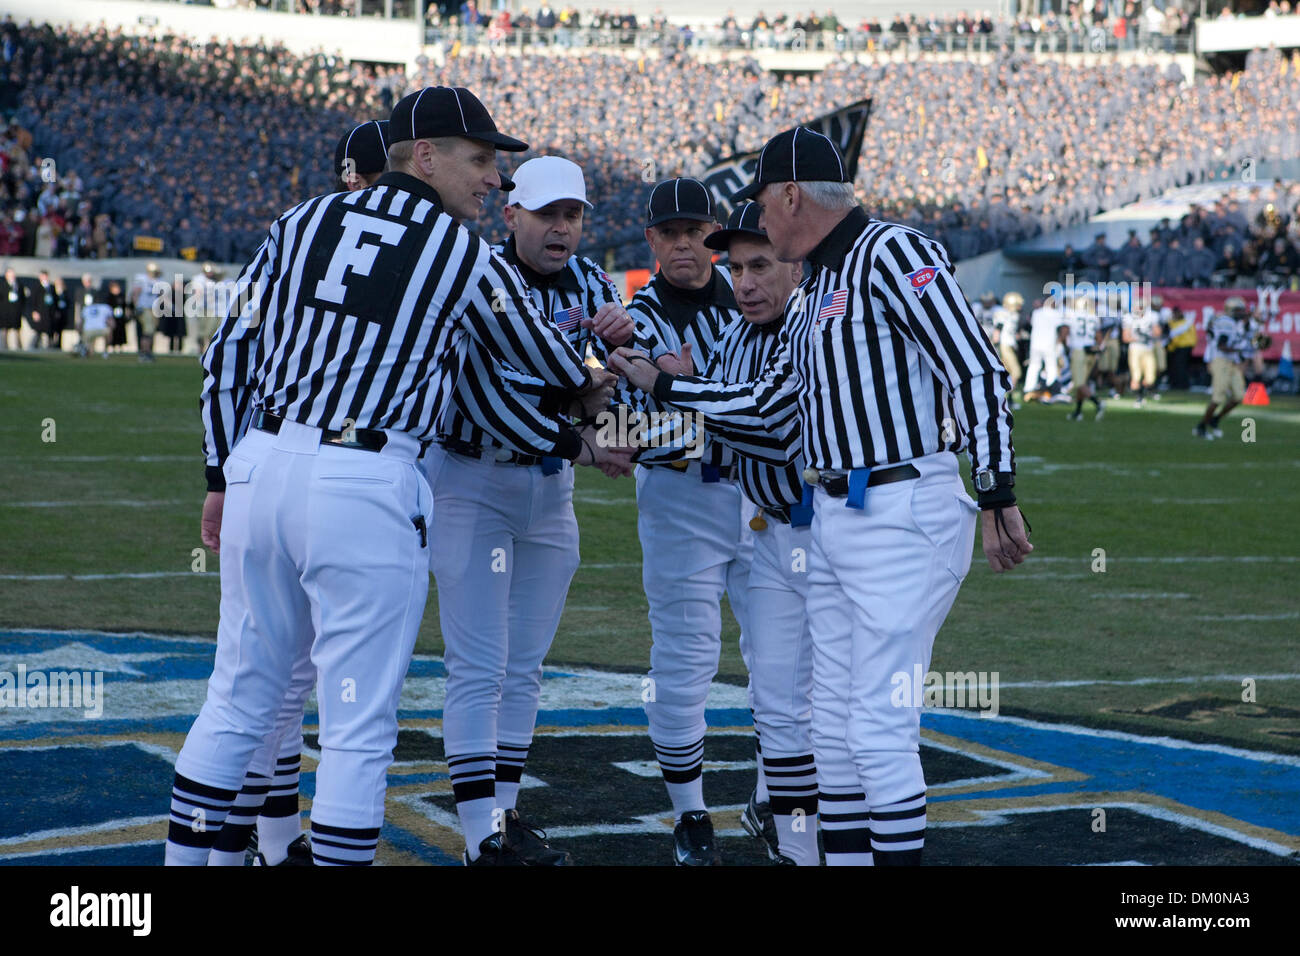 Dec. 12, 2009 - Philadelphia, Pennsylvania, U.S - 12 December 2009:  Game officials at the opening ceremony during the 110th Army-Navy college football game played at Lincoln Financial Field in Philadelphia, Pennsylvania.  Navy defeated Army 17-3 for their eighth straight win in the series. (Credit Image: © Alex Cena/Southcreek Global/ZUMApress.com) Stock Photo